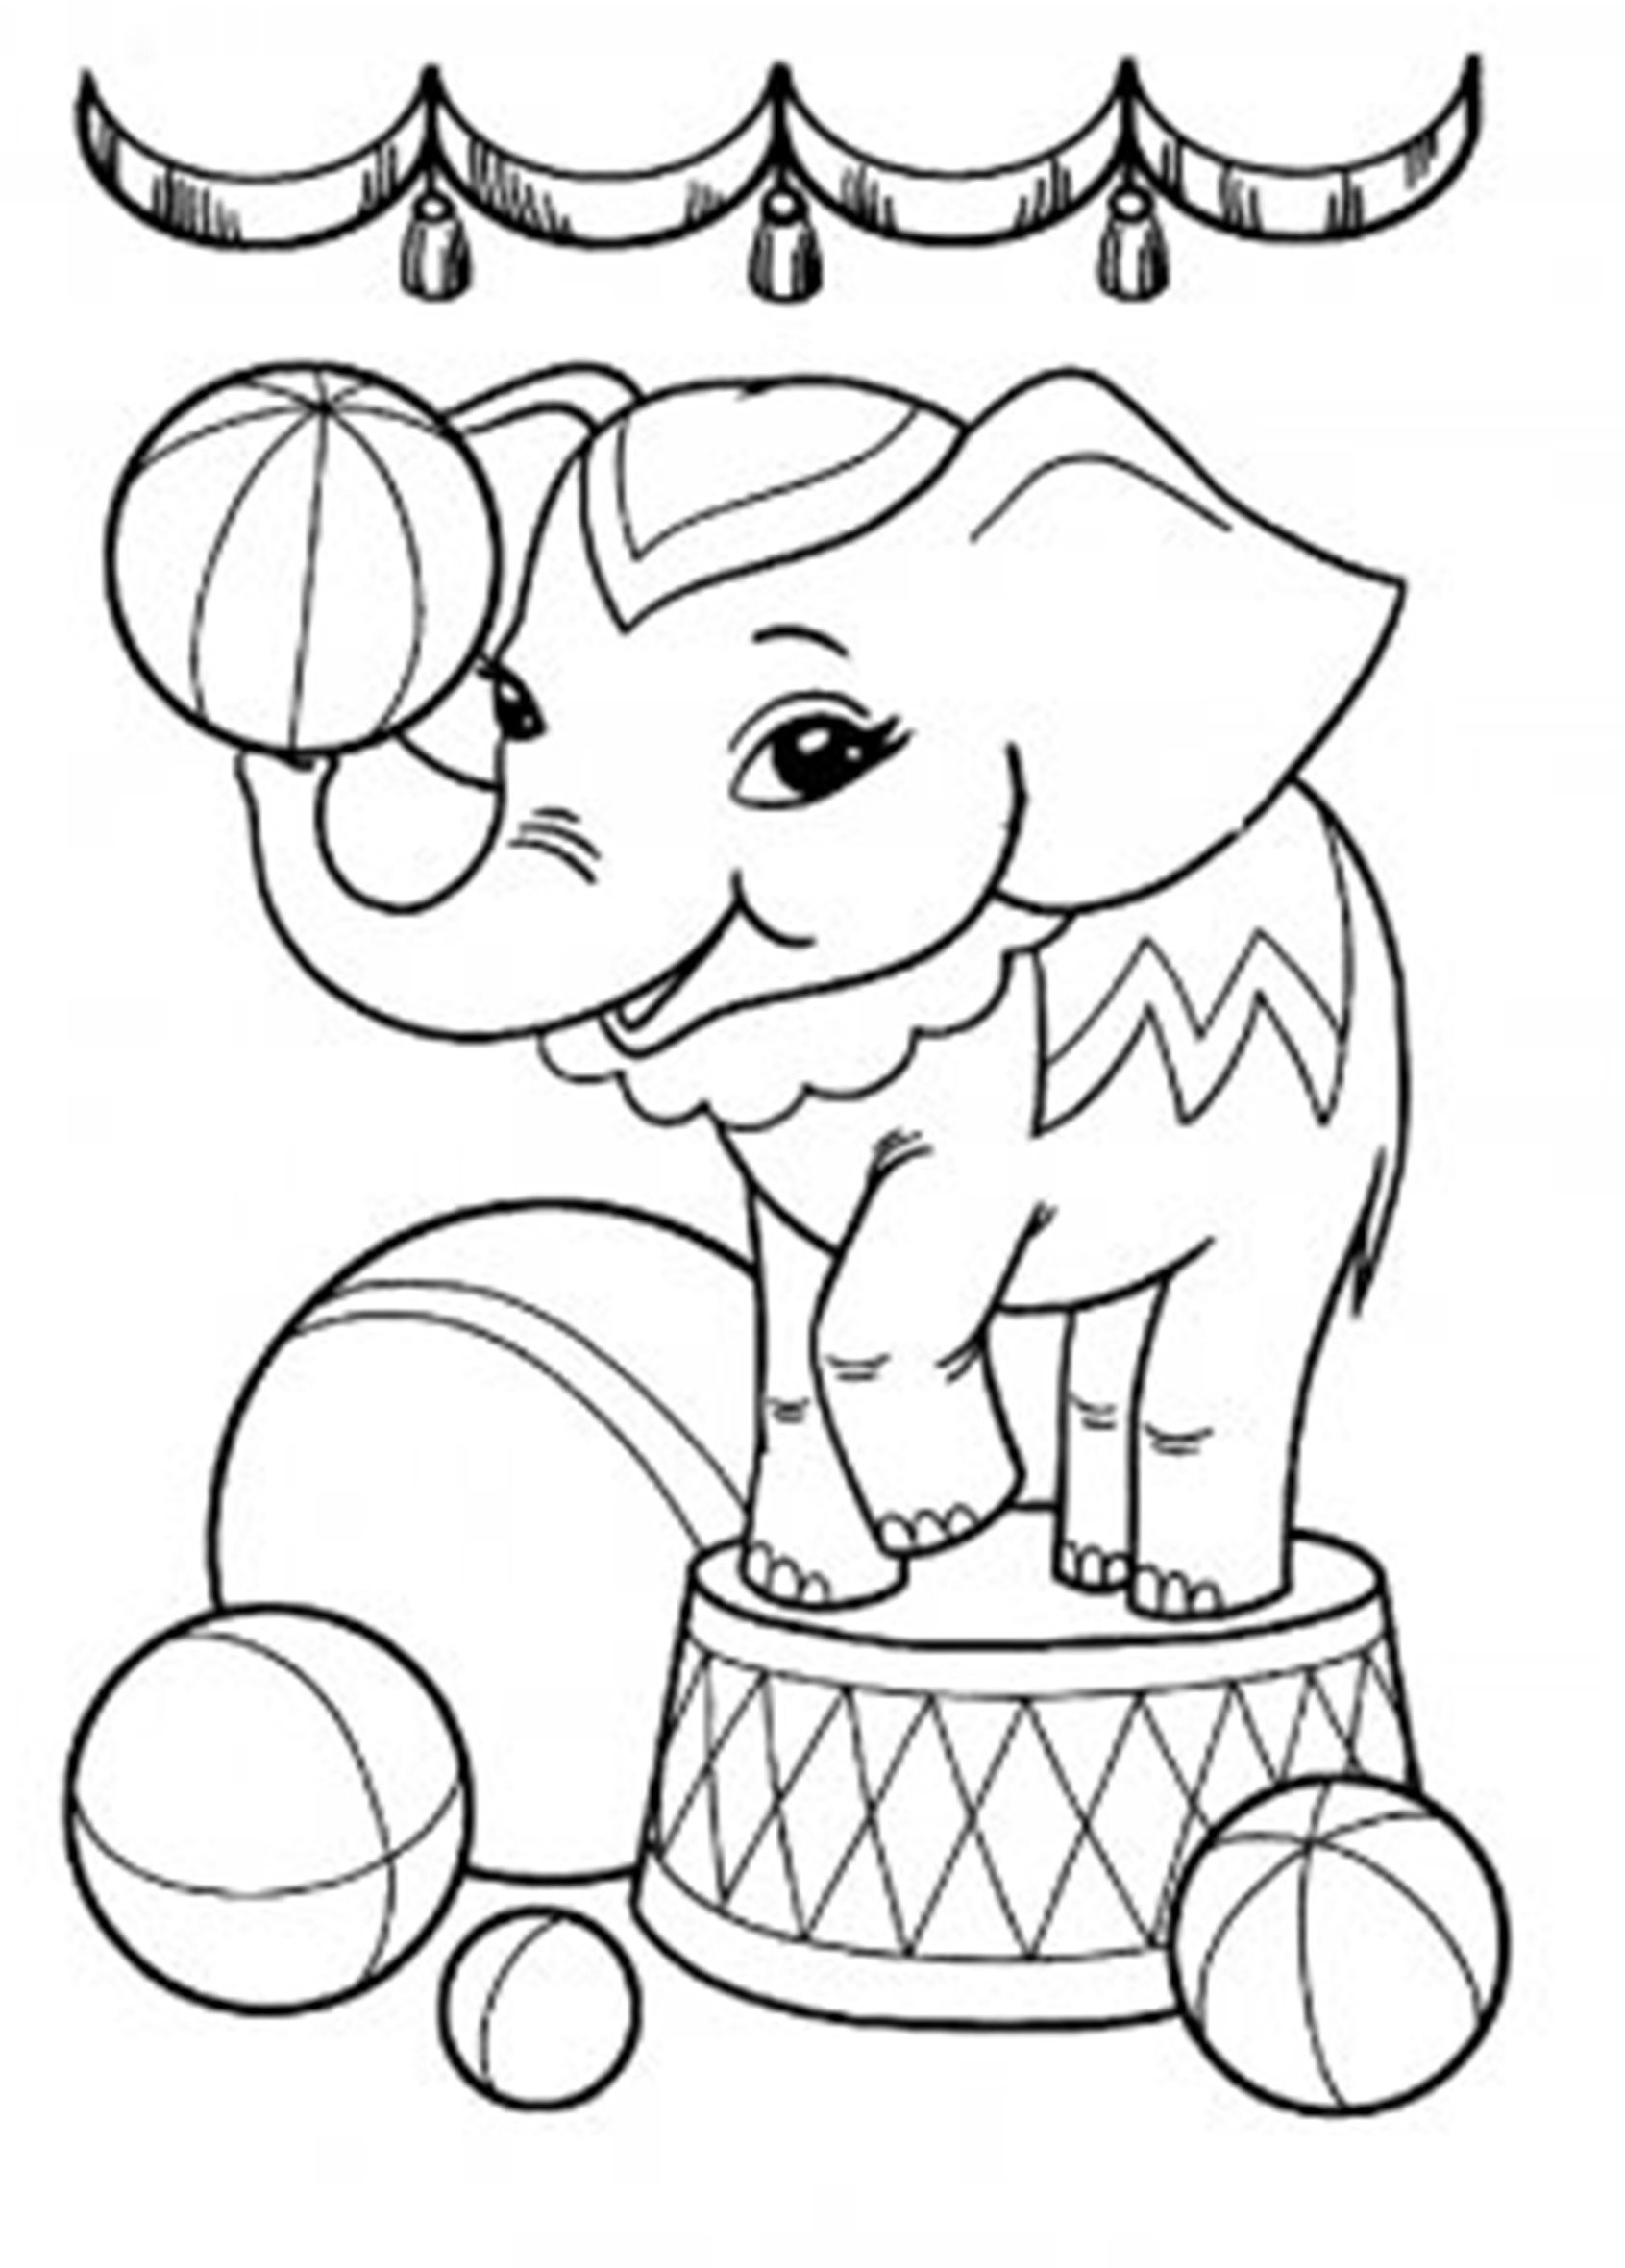 Printable Animal Coloring Pages For Kids
 Elephant Coloring Pages for kids printable for free